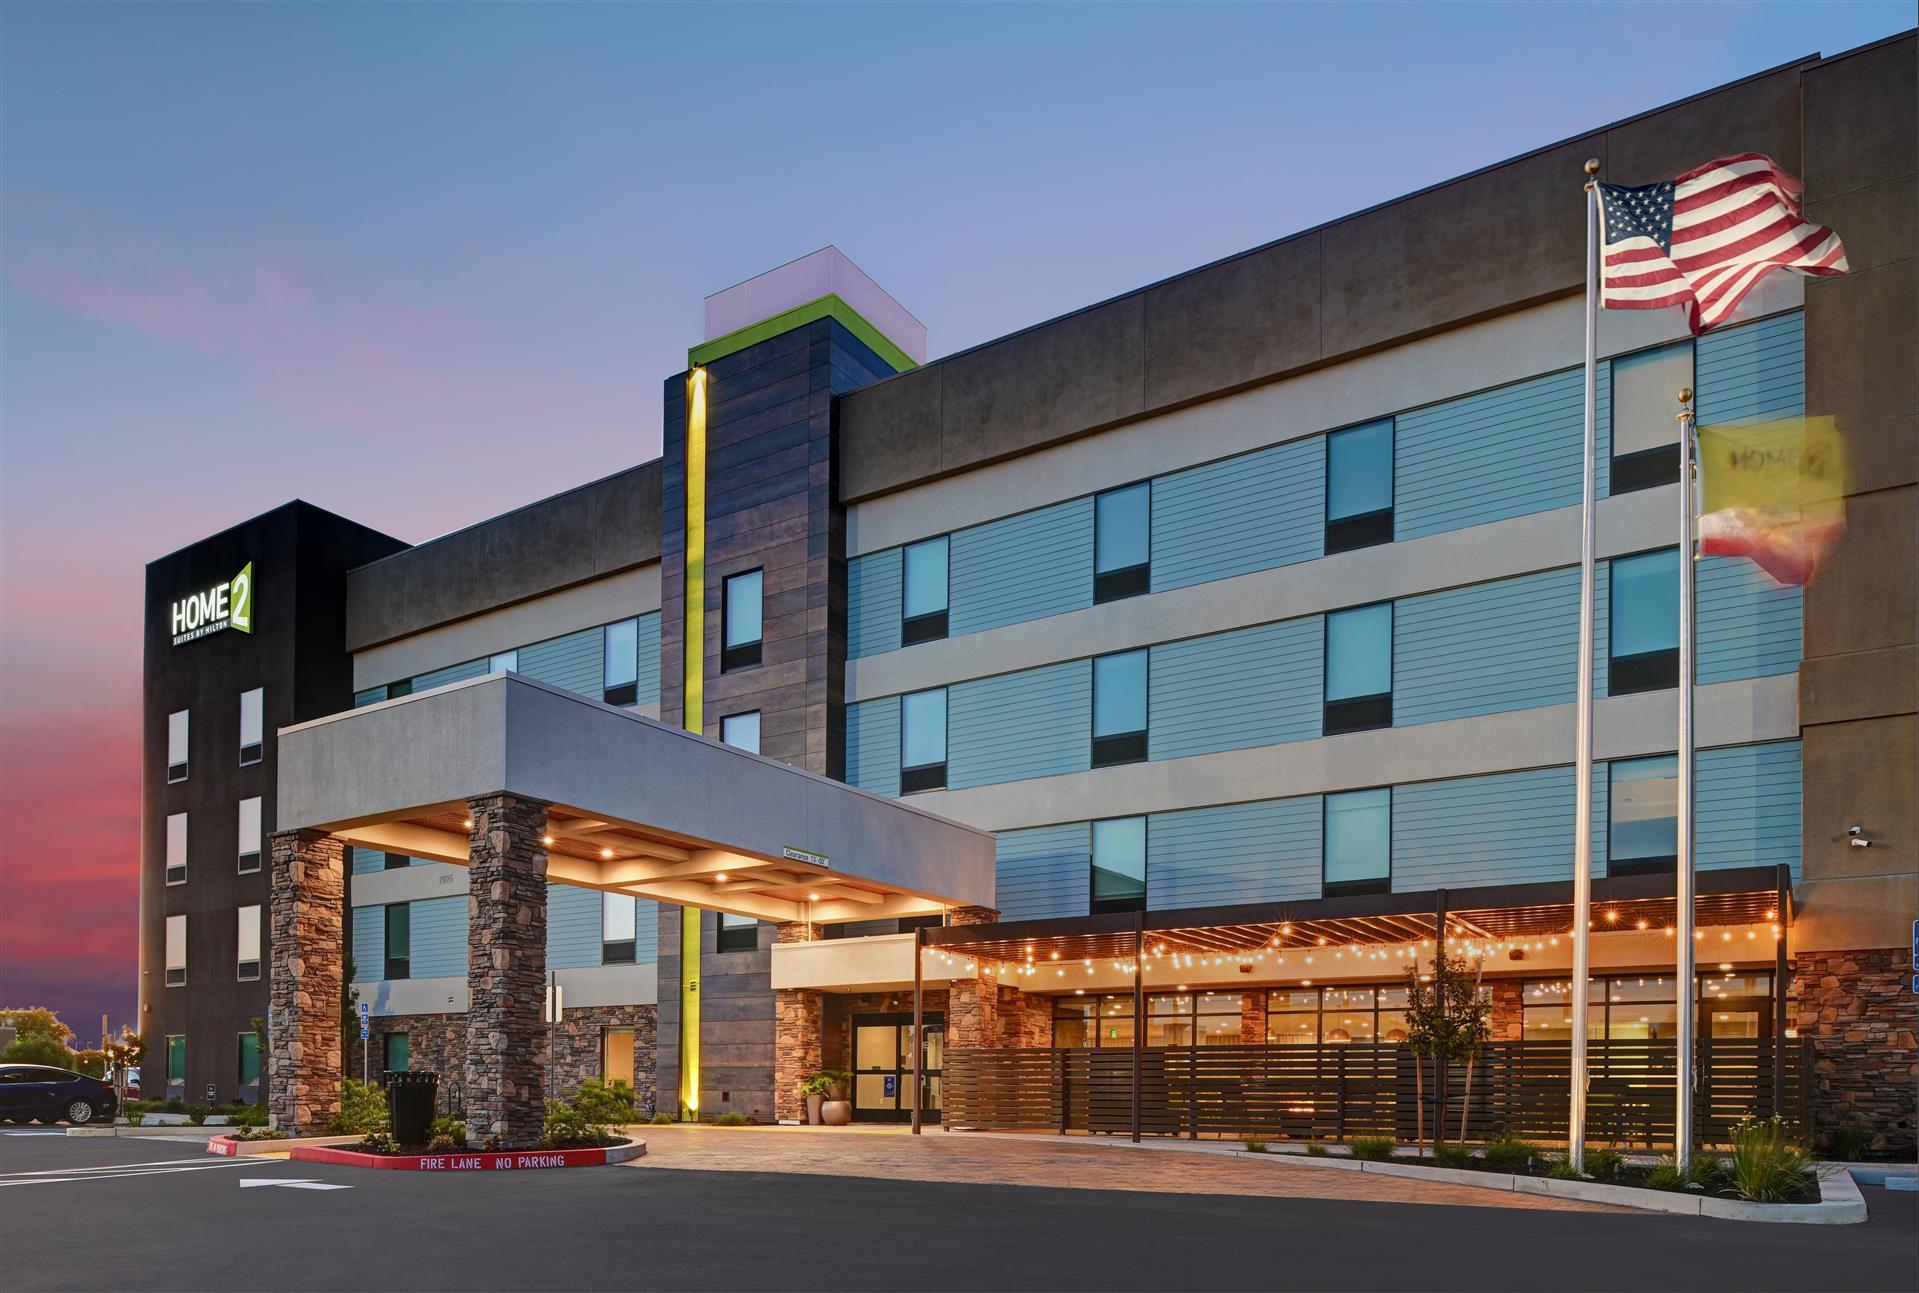 Home2 Suites by Hilton Lincolnshire Chicago in Lincolnshire, IL